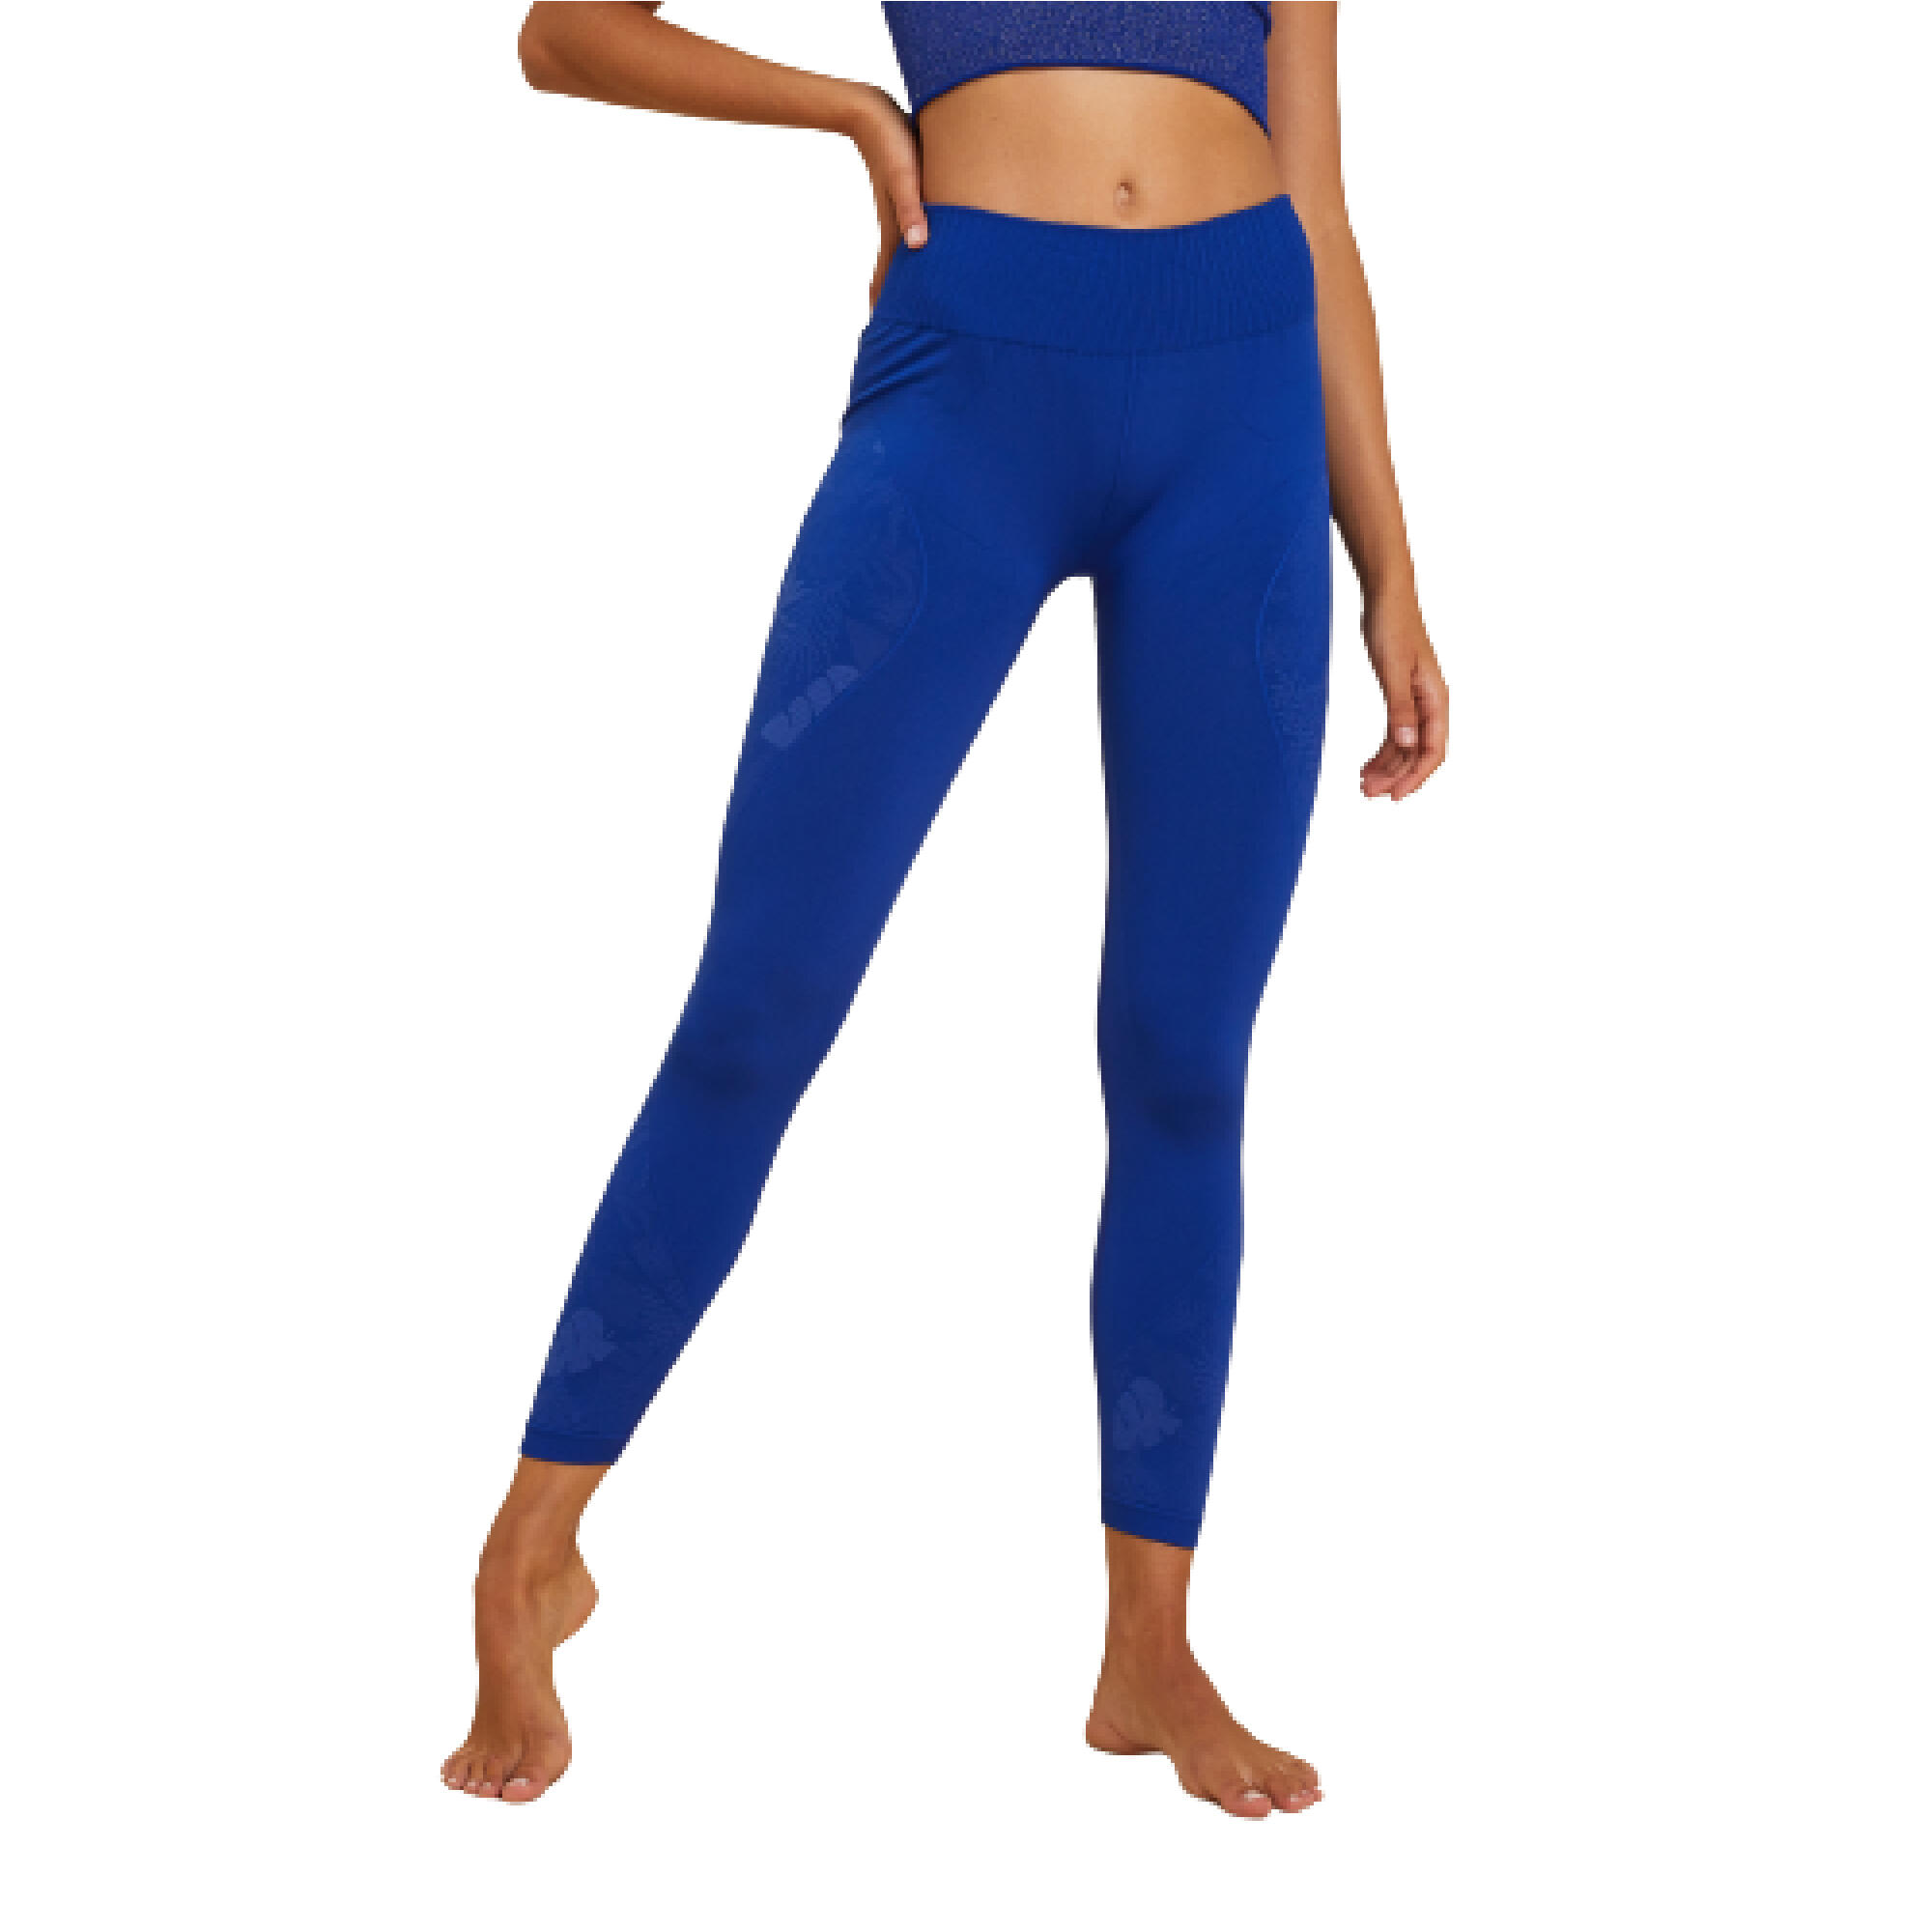 Buy Blue Leggings for Women by LYCOT Online | Ajio.com